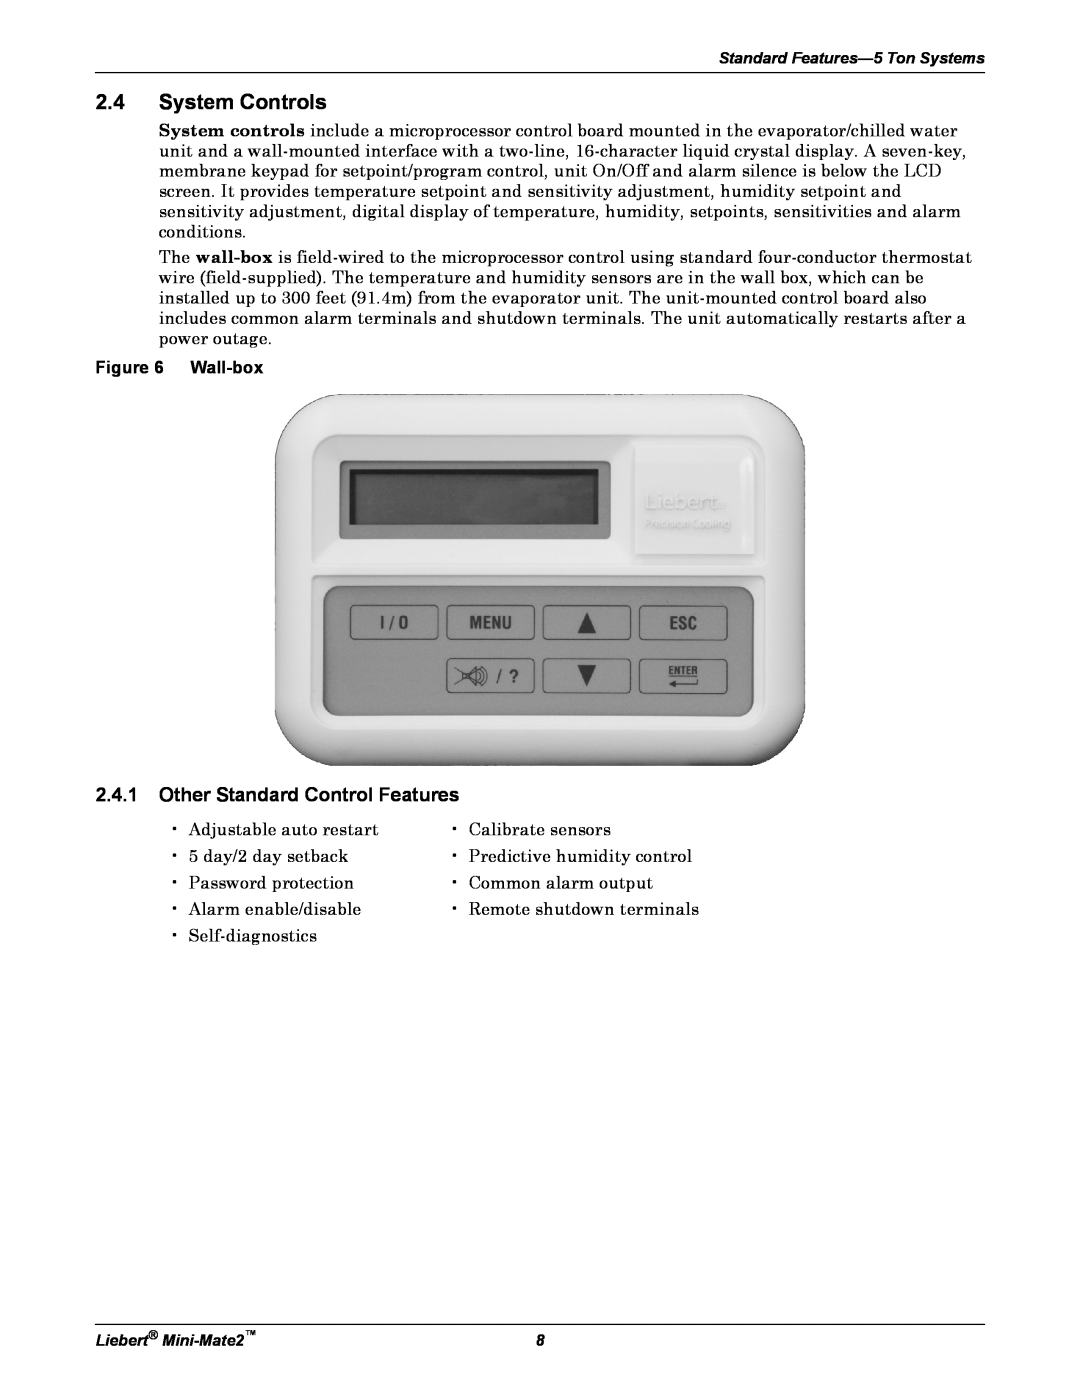 Emerson MINI-MATE2 user manual 2.4System Controls, 2.4.1Other Standard Control Features 